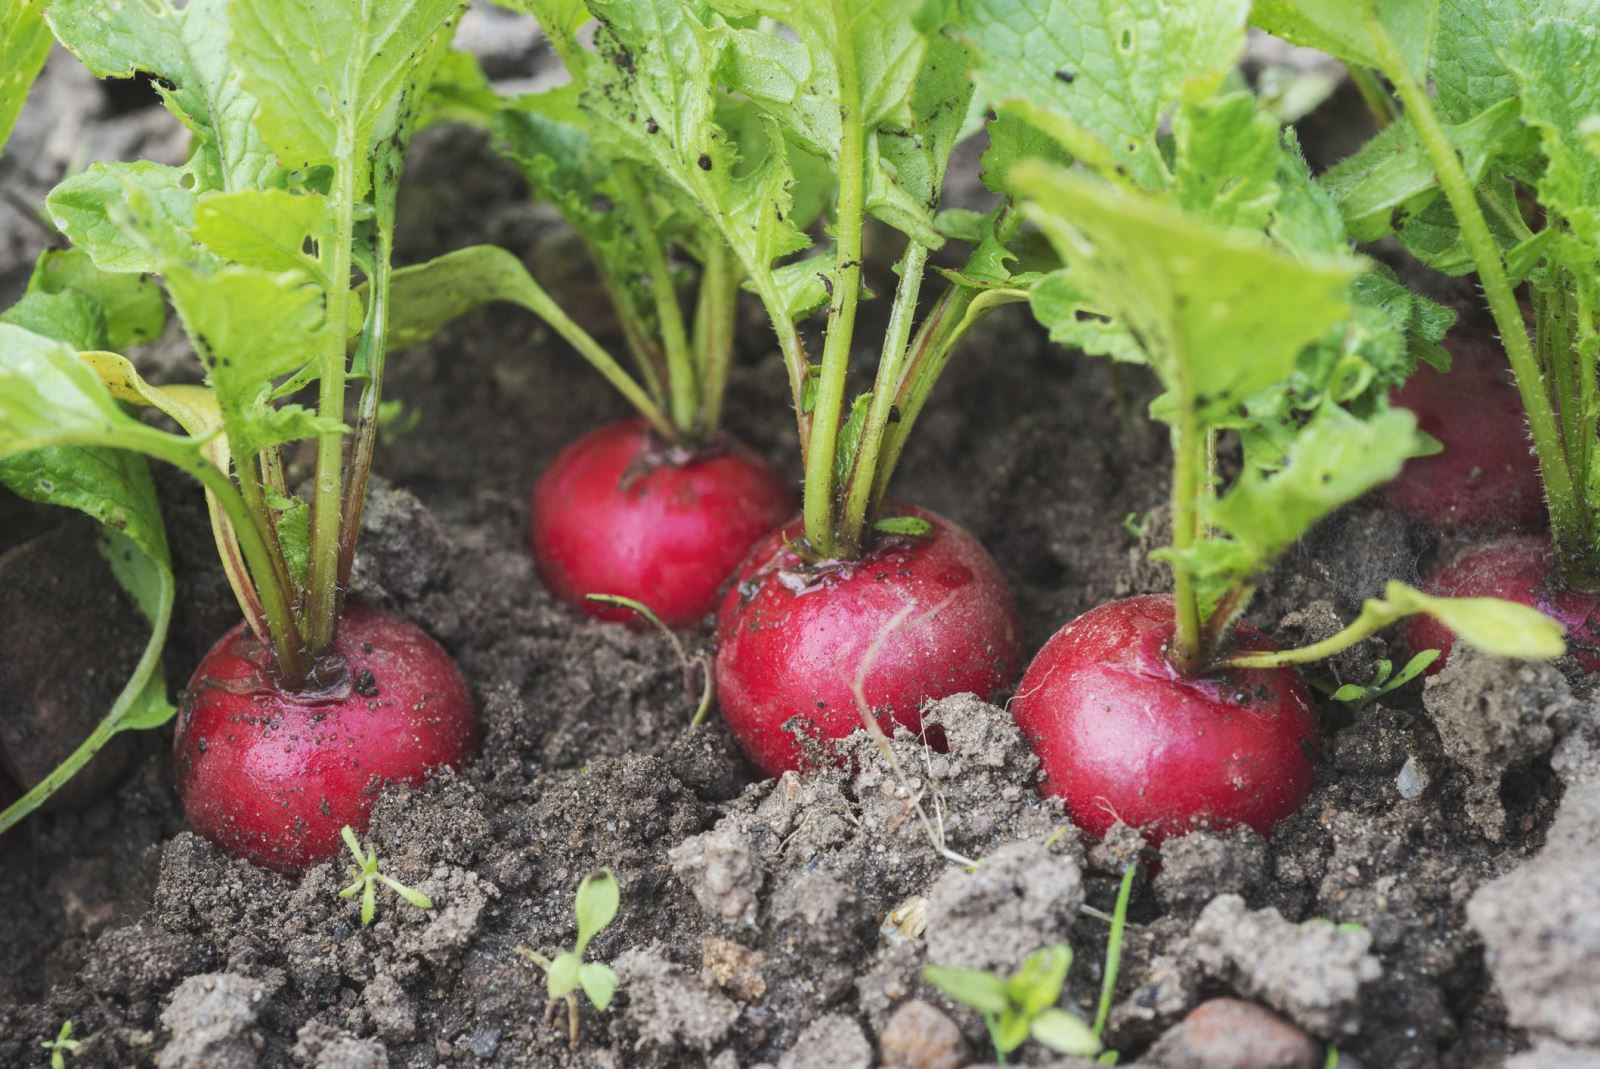 April is a great time to plant cool-season vegetables